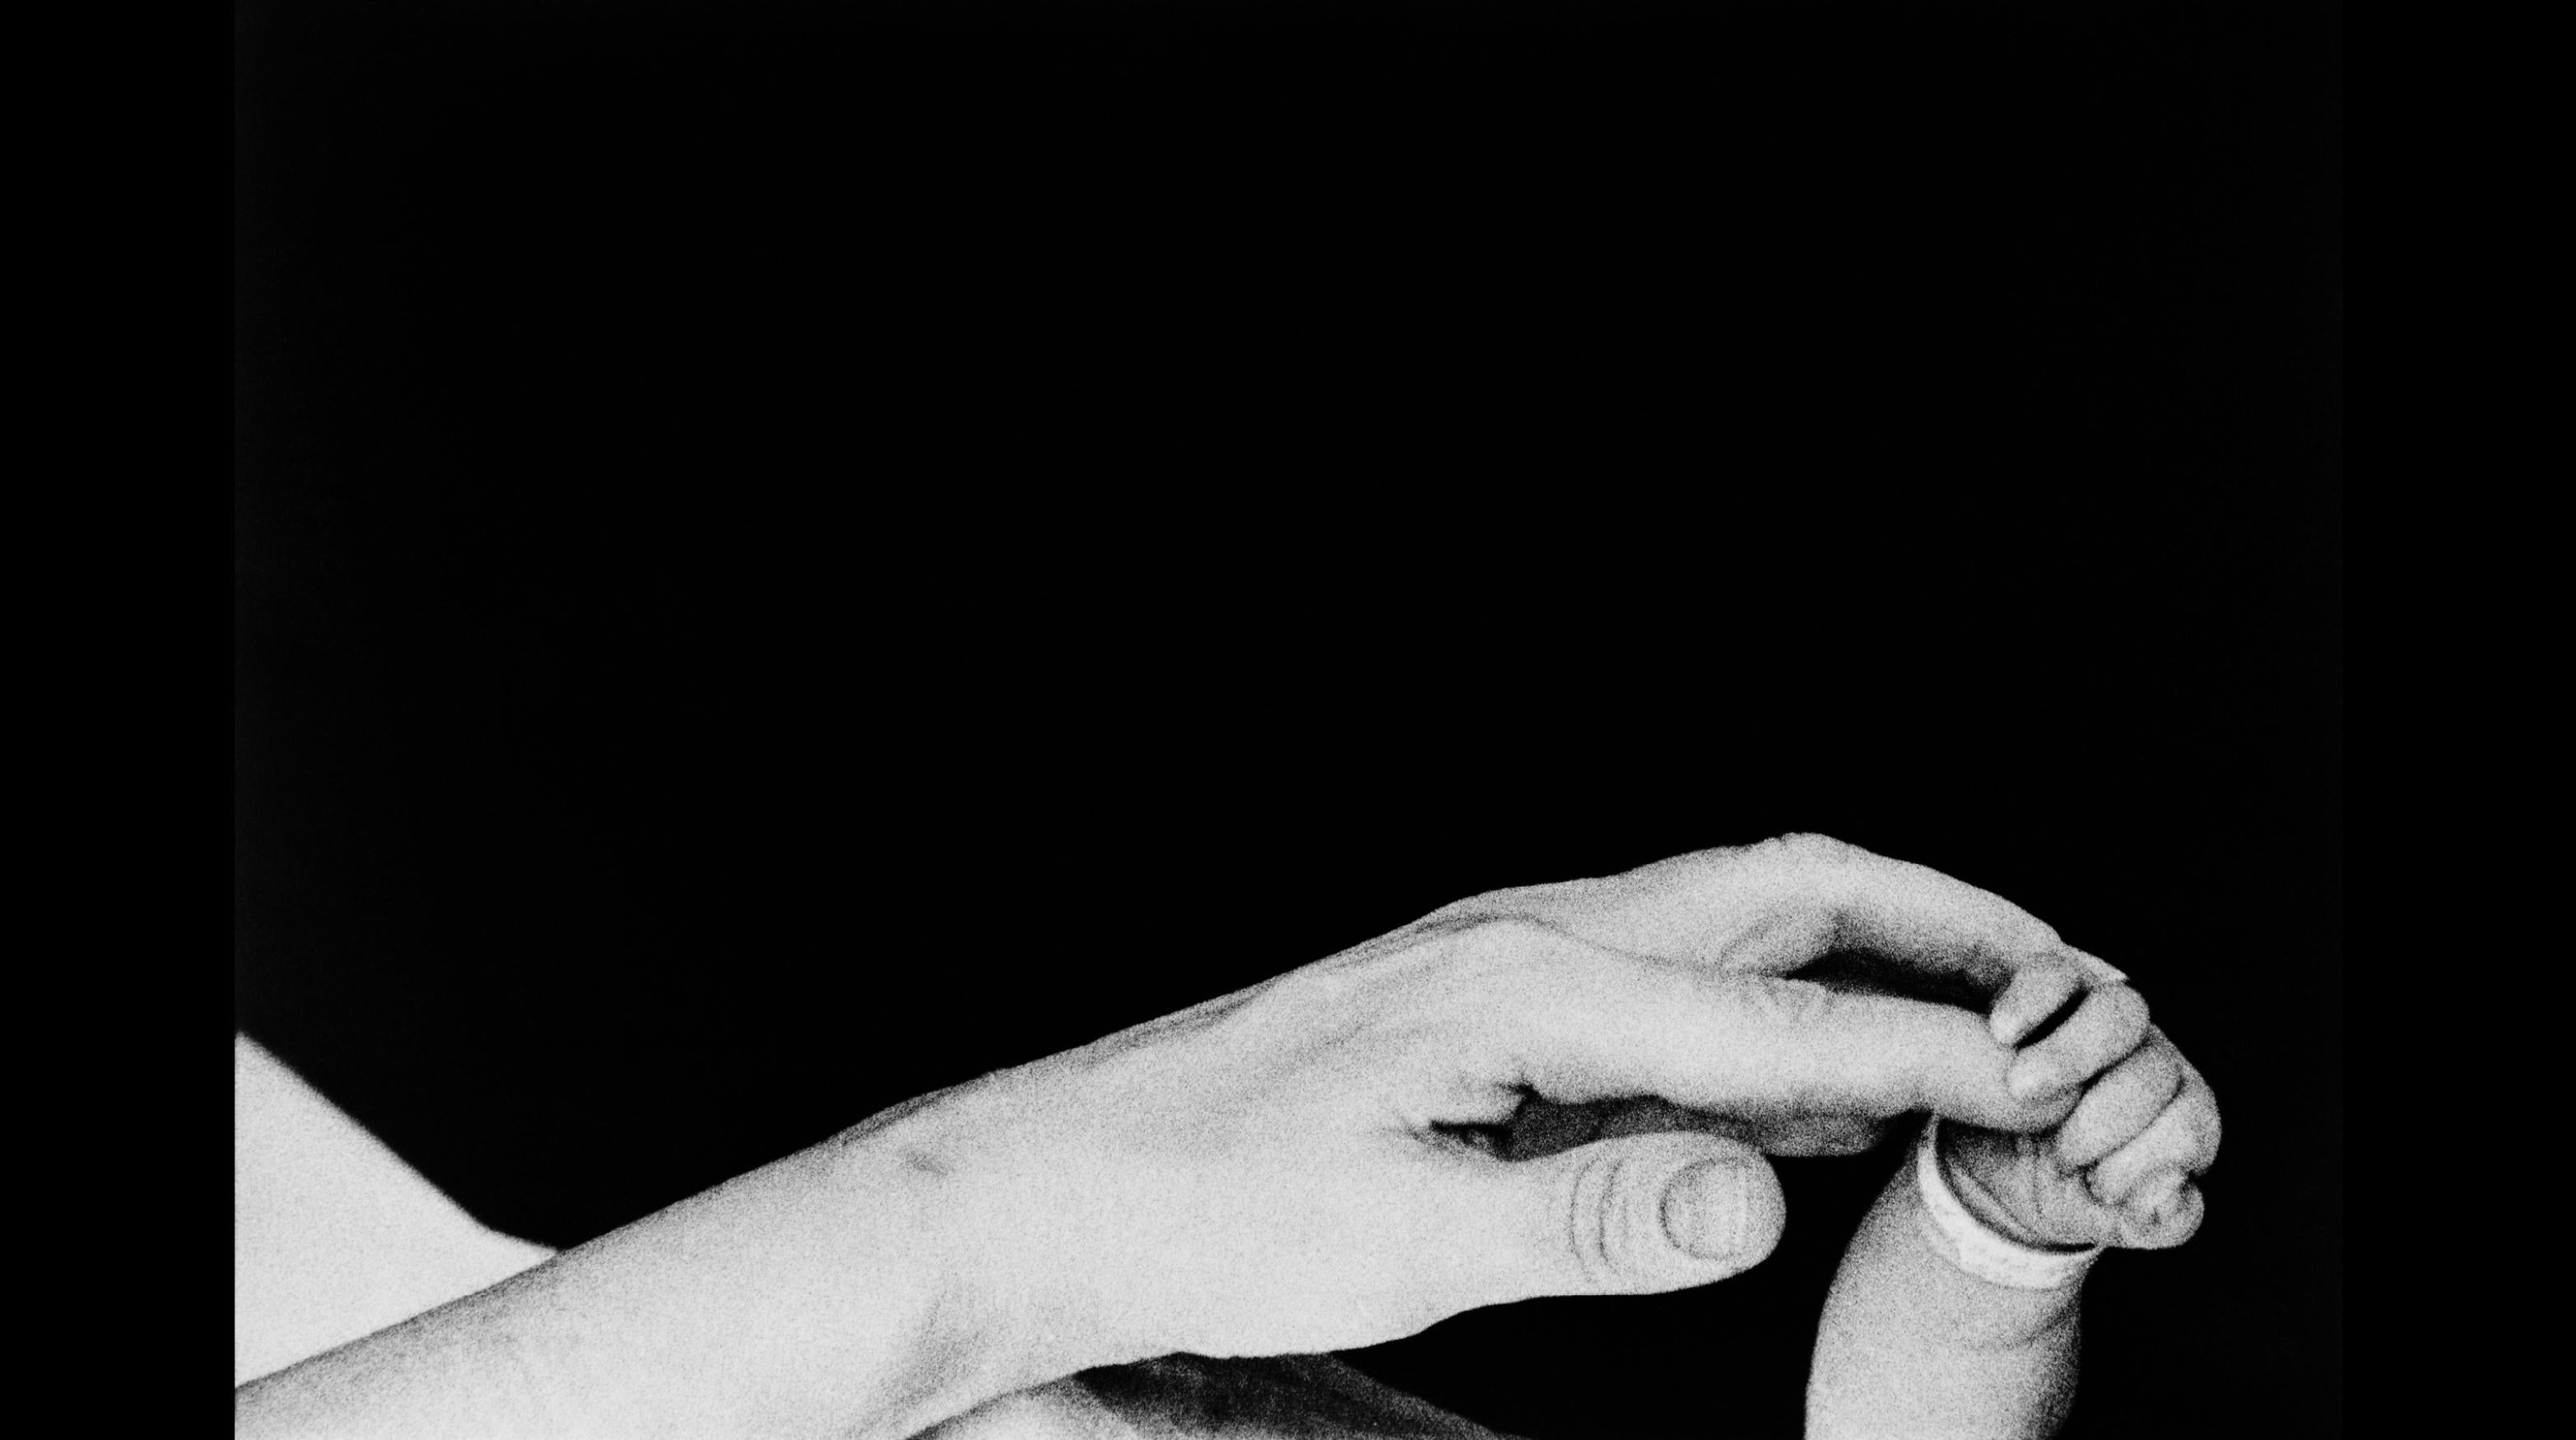 Eve Arnold - A Mother Holds her Child’s Hand, Photography 1960, Printed After